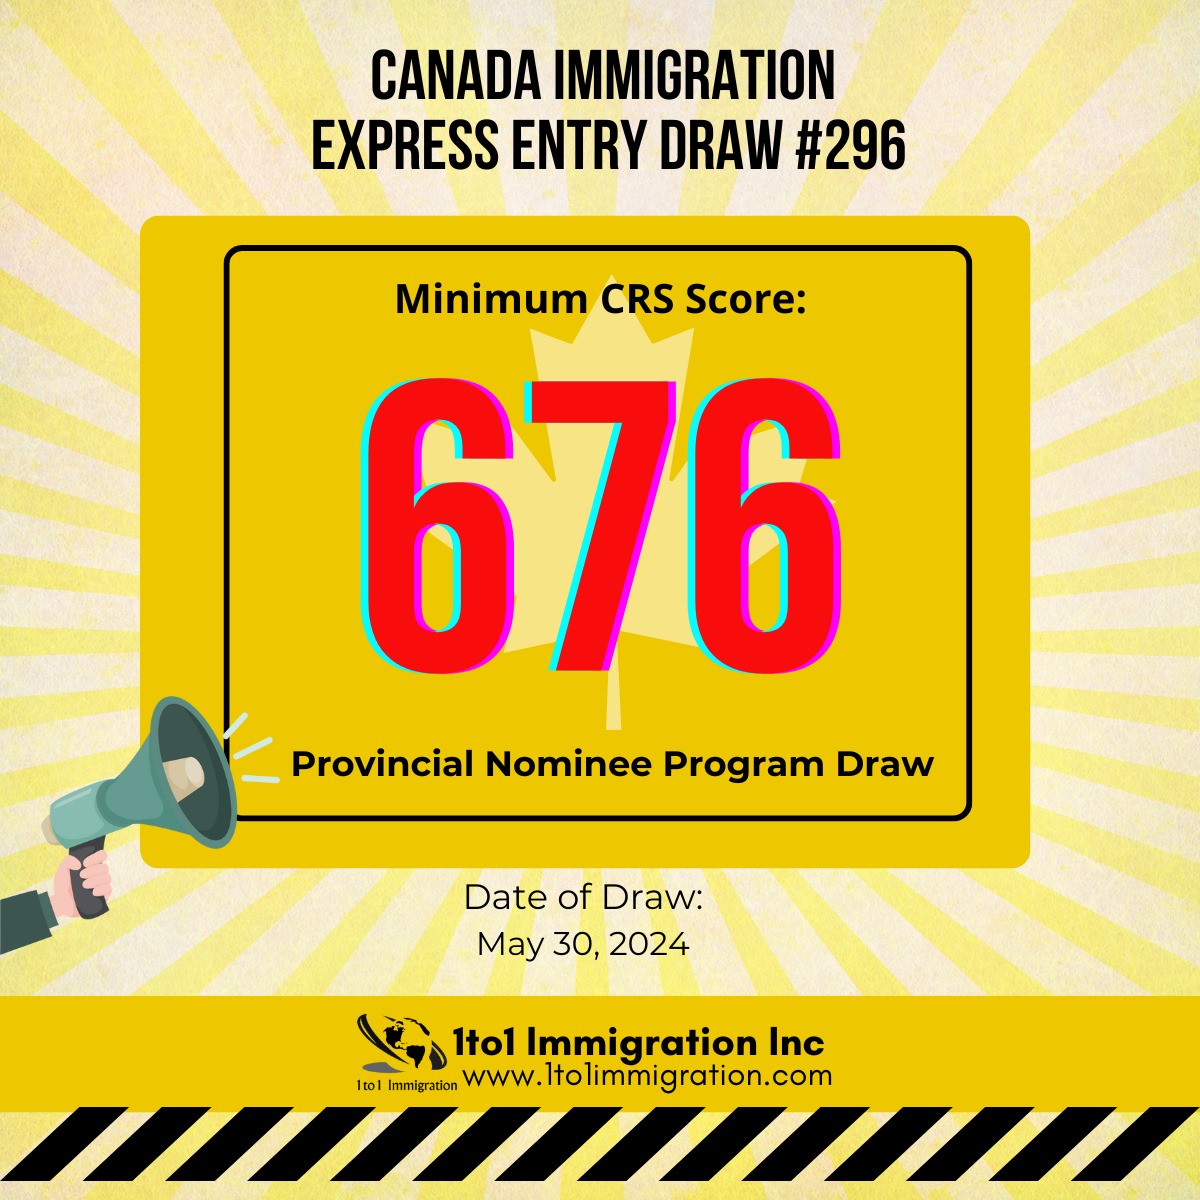 Are you interested in the cheapest and fastest way to immigrate to Canada? Find out more in the comment section.

#Expressentrydraw #EEdraw #EE #Expressentry #immigratetoCanada #eedrawresults #PNPdraw #cecdraw #CEC #canadianexperienceclass #PNP #provicincialnomineeprogram